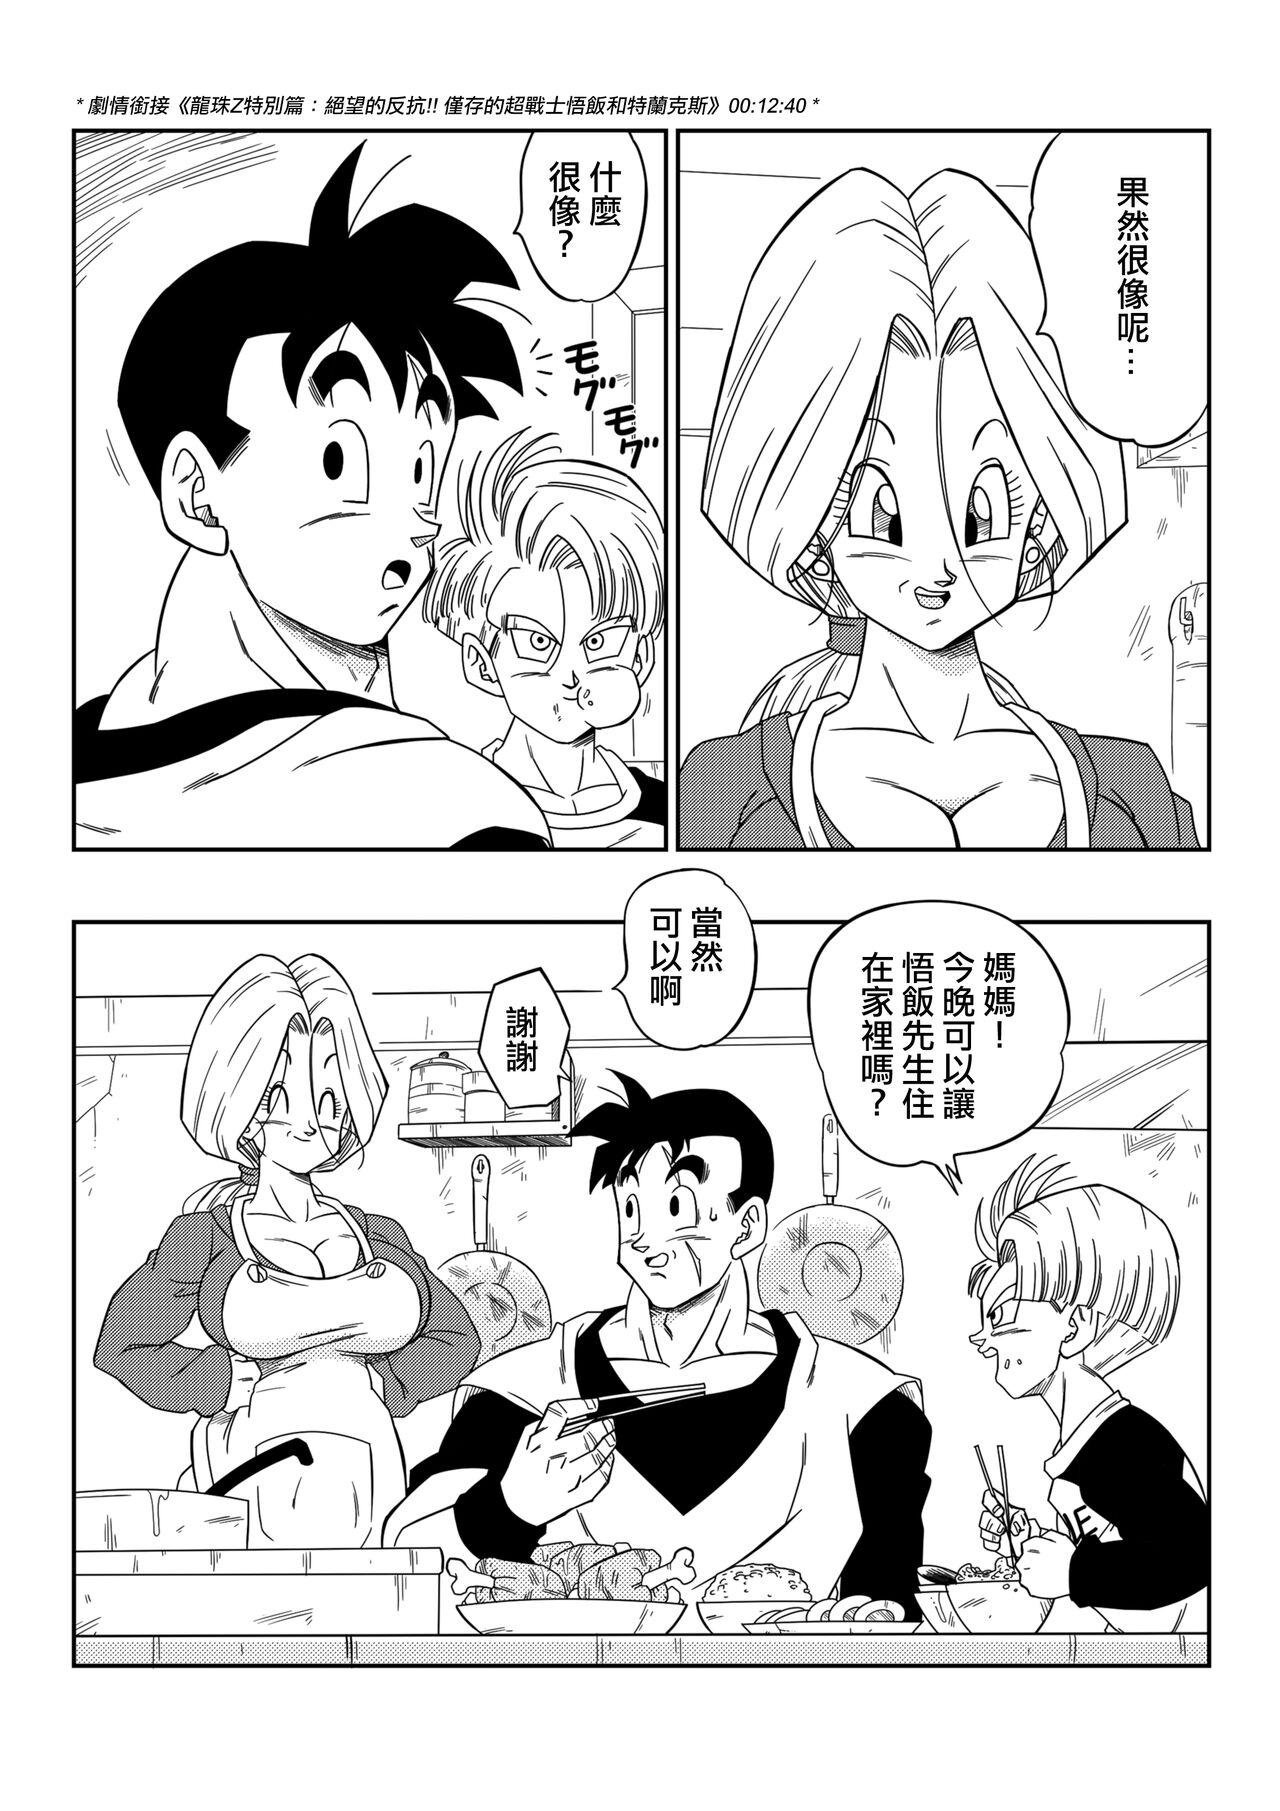 Amateur Cum Lost of sex in this Future! - BULMA and GOHAN - Dragon ball z Cornudo - Page 3